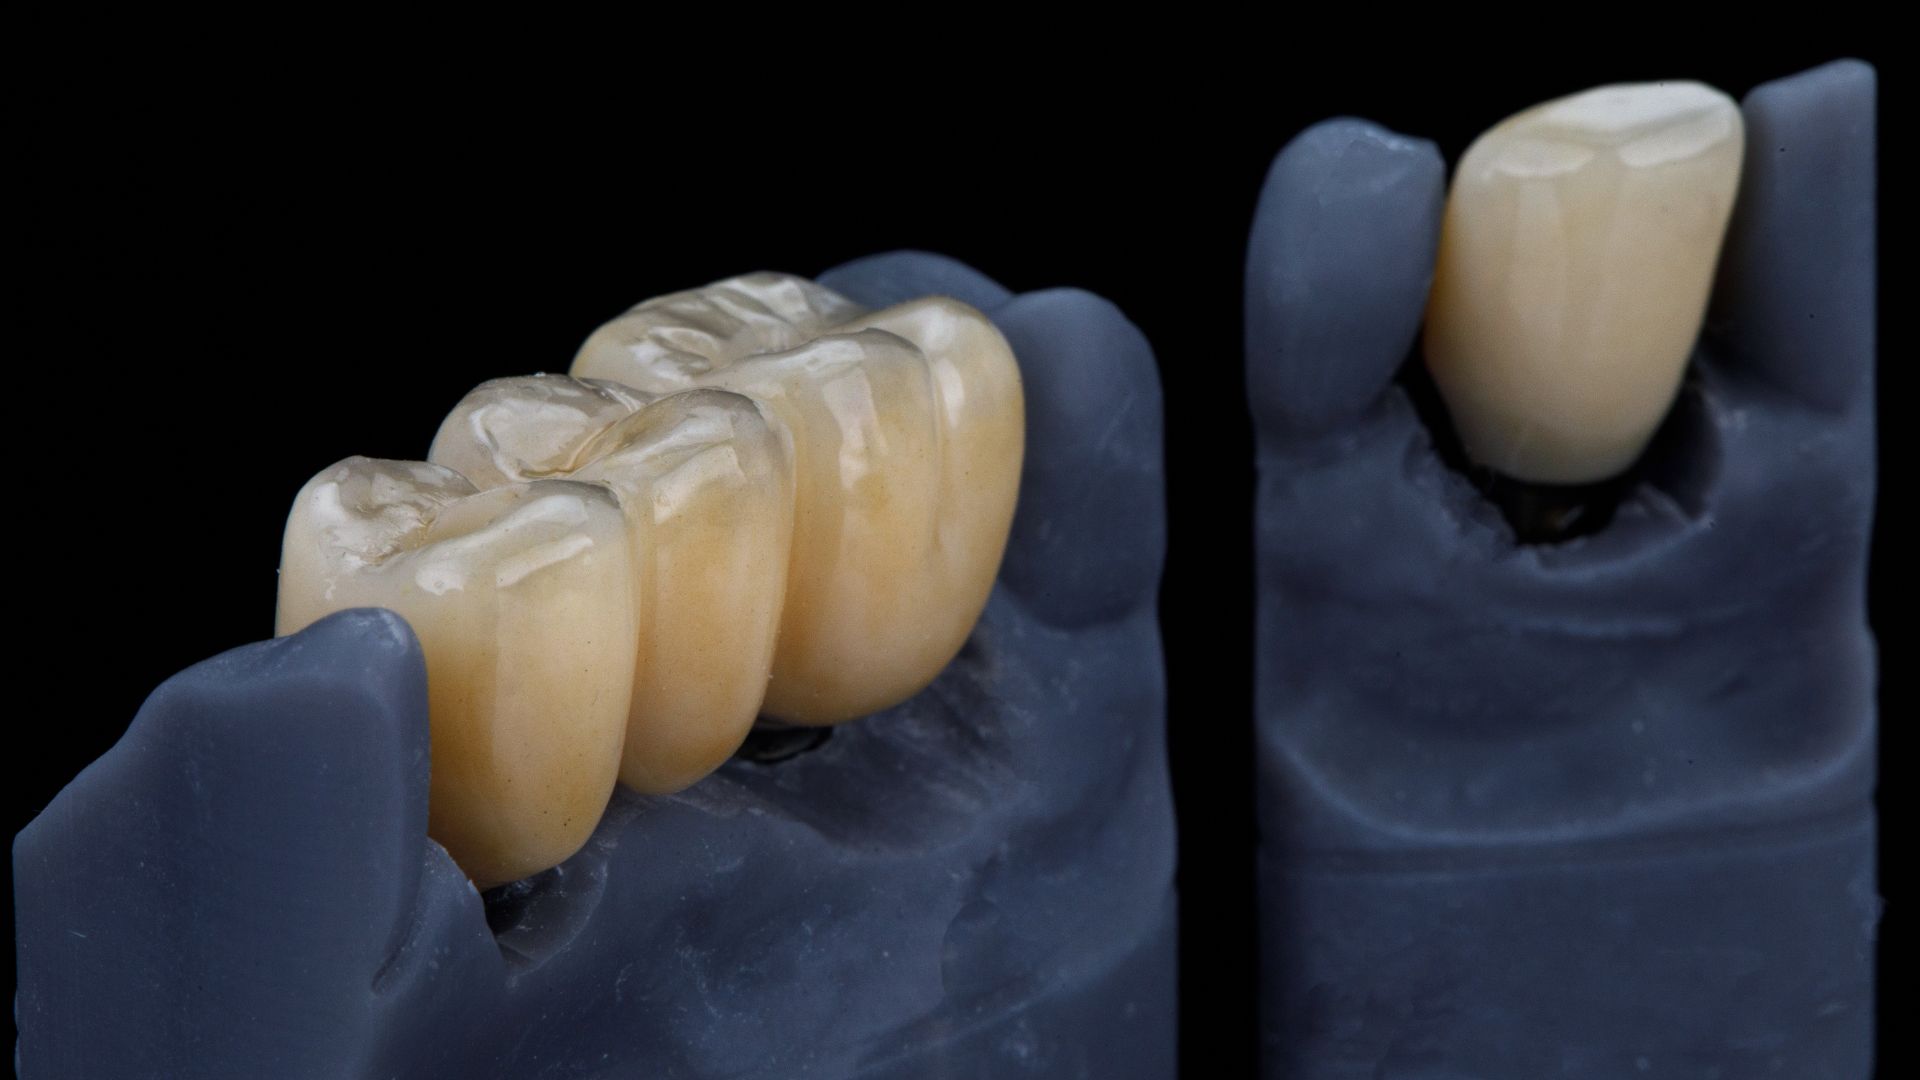 what-is-the-difference-of-zirconia-crown-from-other-crowns? in turkey